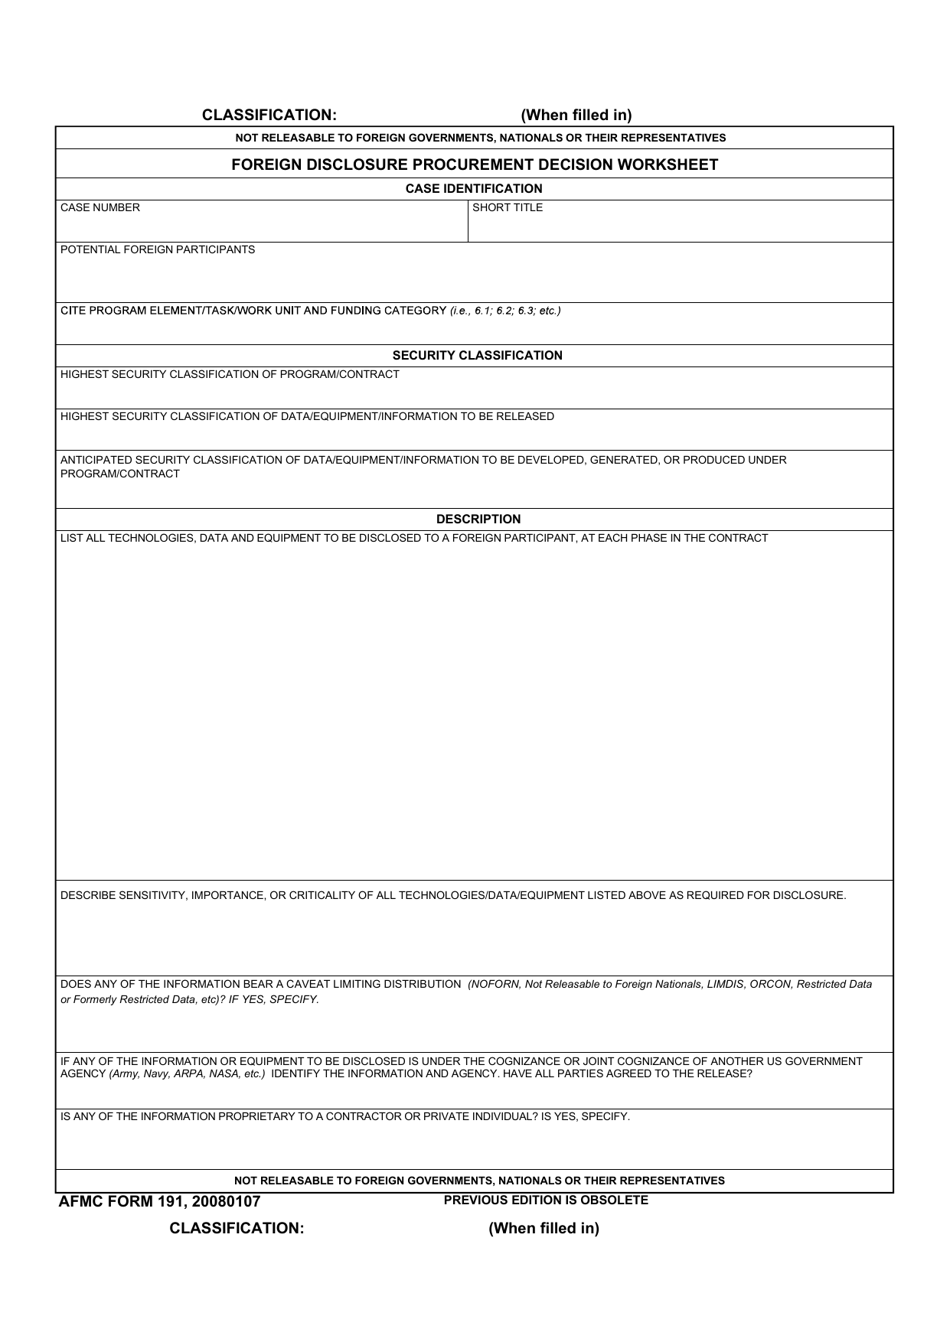 afmc-form-191-download-fillable-pdf-or-fill-online-foreign-disclosure